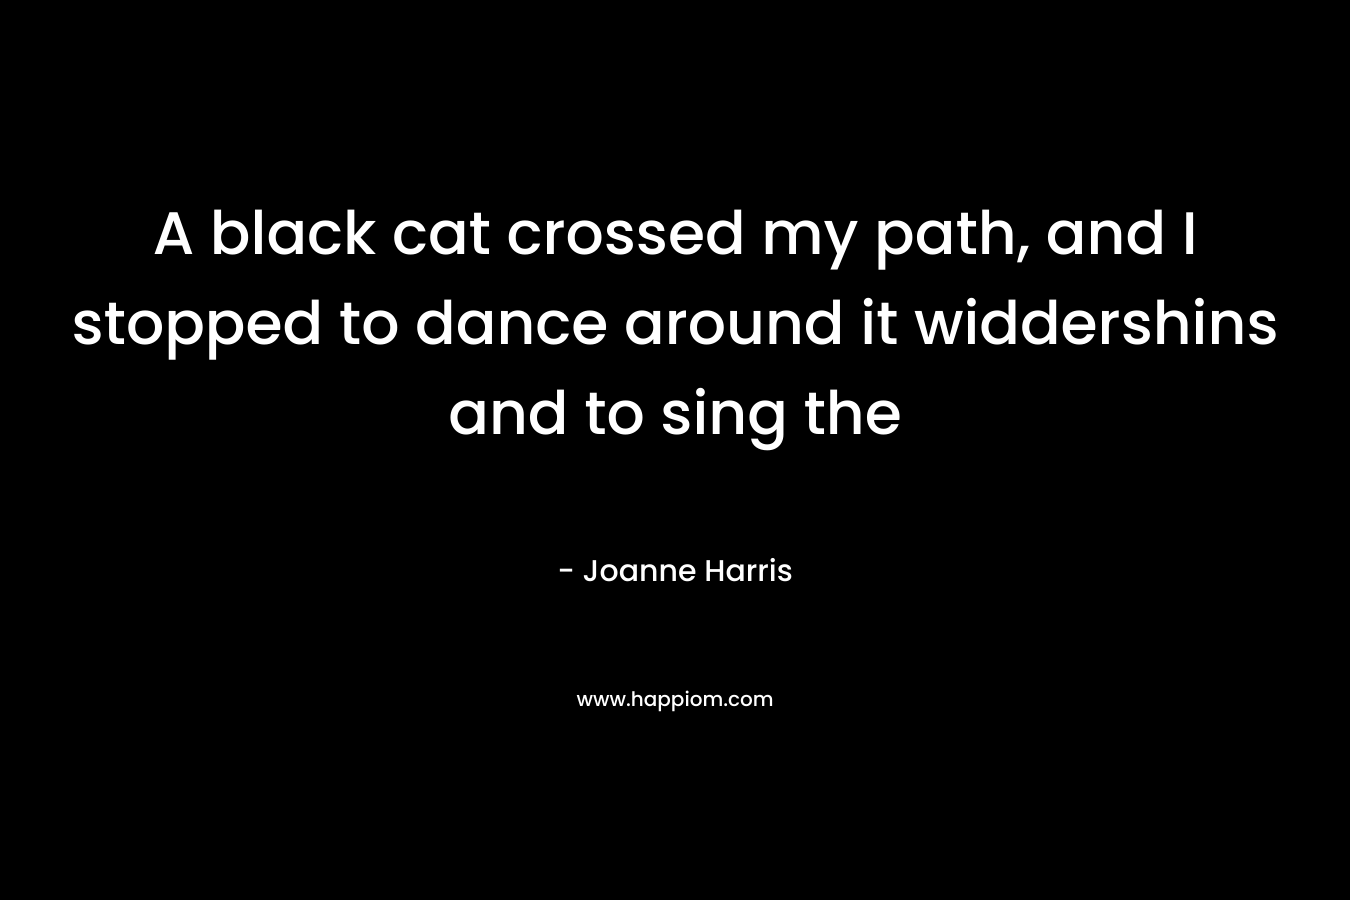 A black cat crossed my path, and I stopped to dance around it widdershins and to sing the 